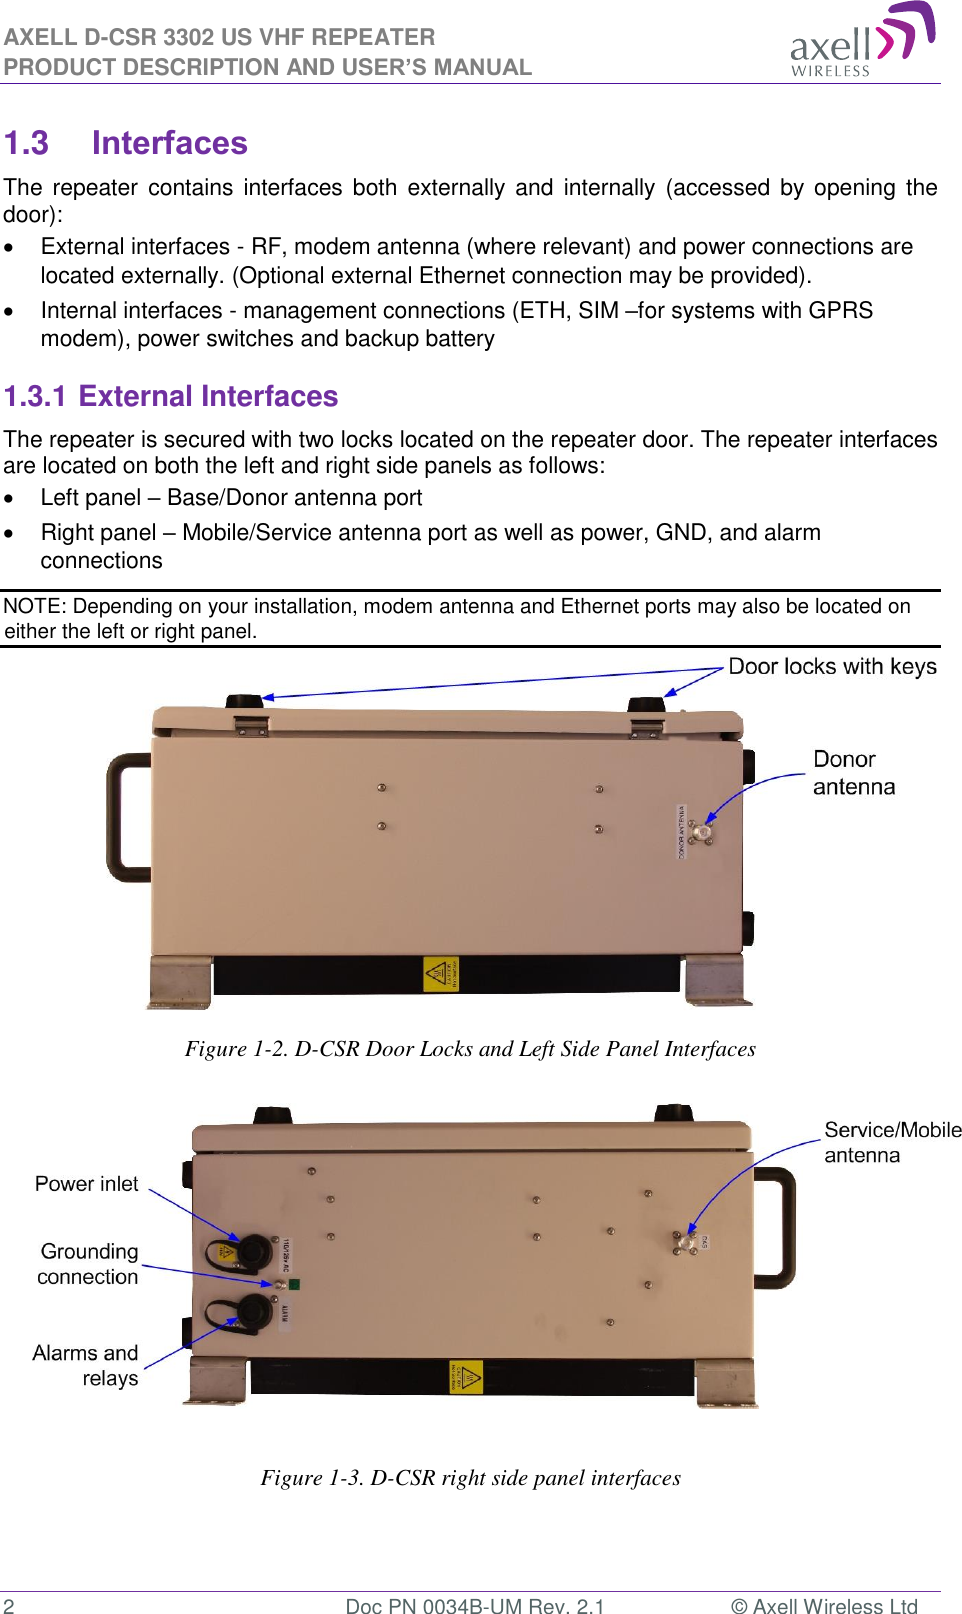 AXELL D-CSR 3302 US VHF REPEATER PRODUCT DESCRIPTION AND USER’S MANUAL  2  Doc PN 0034B-UM Rev. 2.1  © Axell Wireless Ltd 1.3 Interfaces The  repeater contains interfaces  both externally and  internally  (accessed by  opening  the door):   External interfaces - RF, modem antenna (where relevant) and power connections are located externally. (Optional external Ethernet connection may be provided).   Internal interfaces - management connections (ETH, SIM –for systems with GPRS modem), power switches and backup battery 1.3.1 External Interfaces The repeater is secured with two locks located on the repeater door. The repeater interfaces are located on both the left and right side panels as follows:   Left panel – Base/Donor antenna port   Right panel – Mobile/Service antenna port as well as power, GND, and alarm connections NOTE: Depending on your installation, modem antenna and Ethernet ports may also be located on either the left or right panel.               Figure 1-2. D-CSR Door Locks and Left Side Panel Interfaces                  Figure 1-3. D-CSR right side panel interfaces    